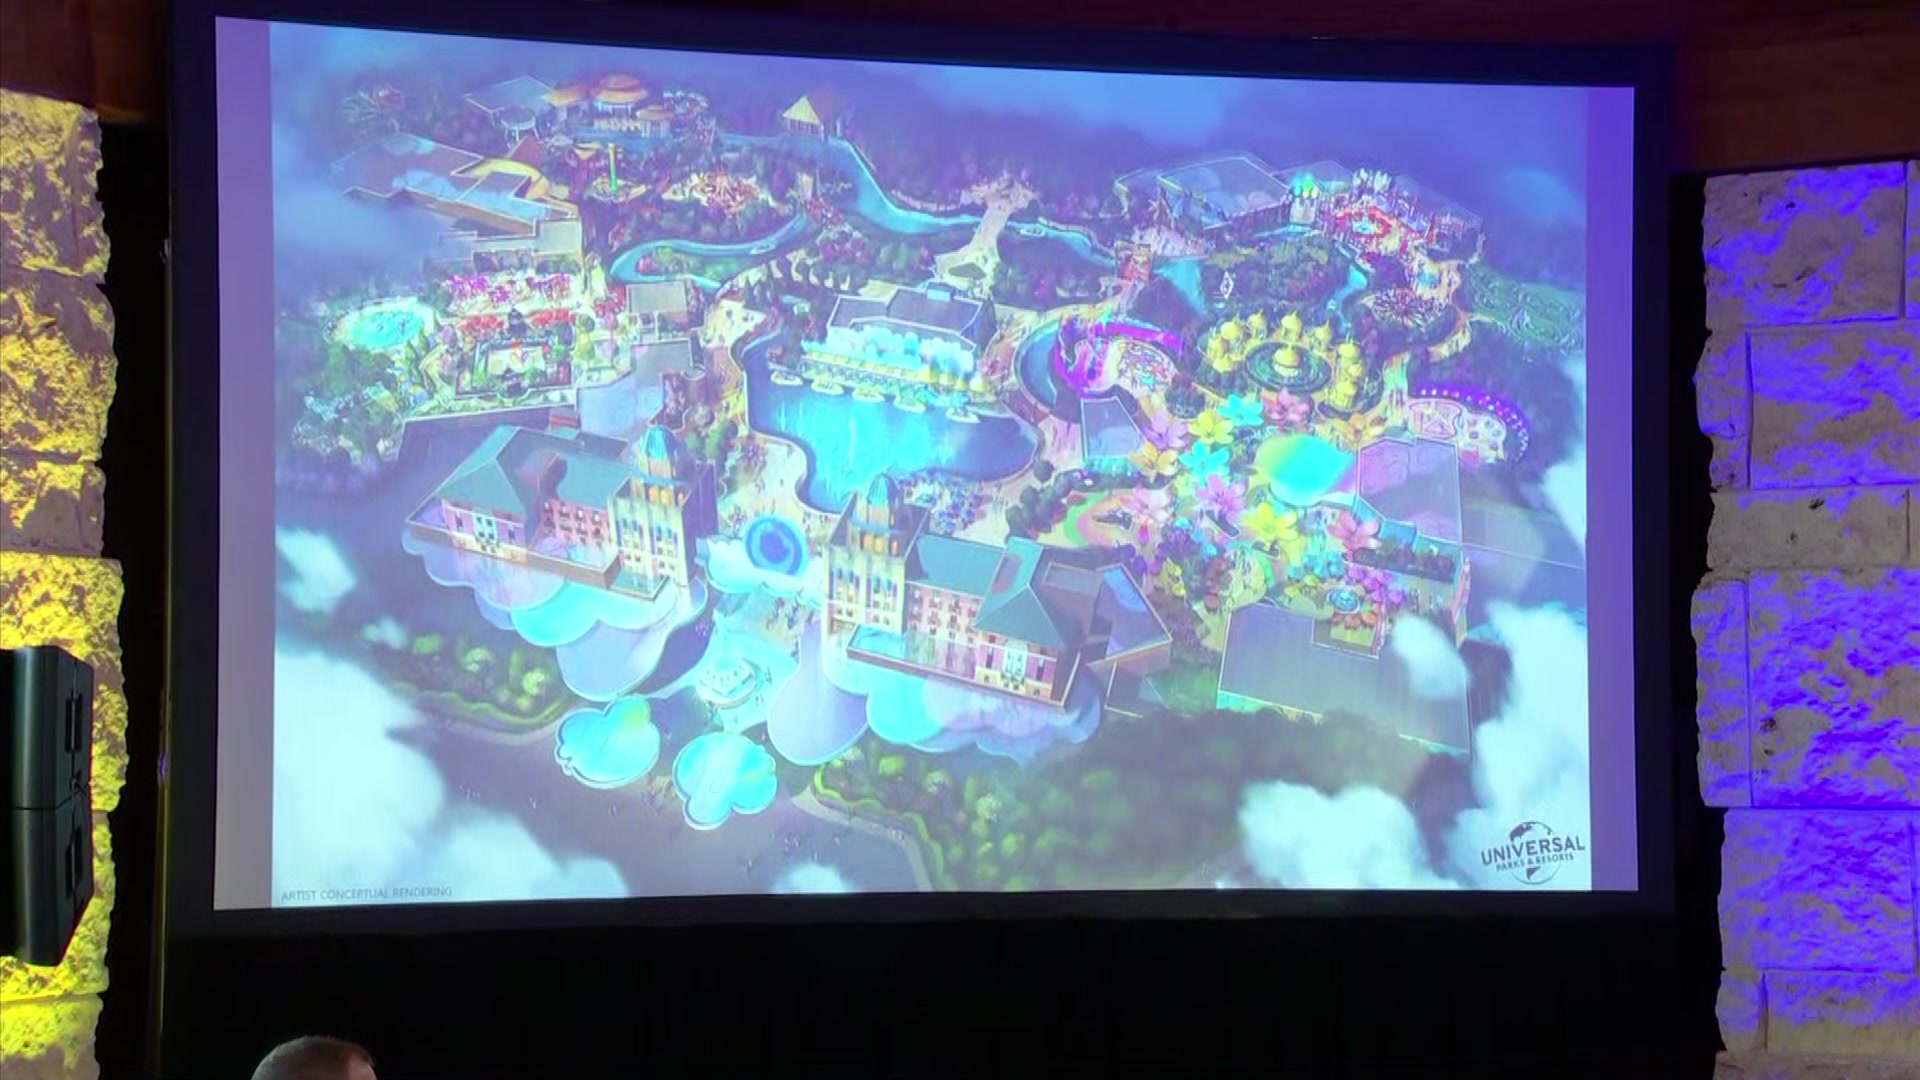 Universal announces new theme park for families with young kids